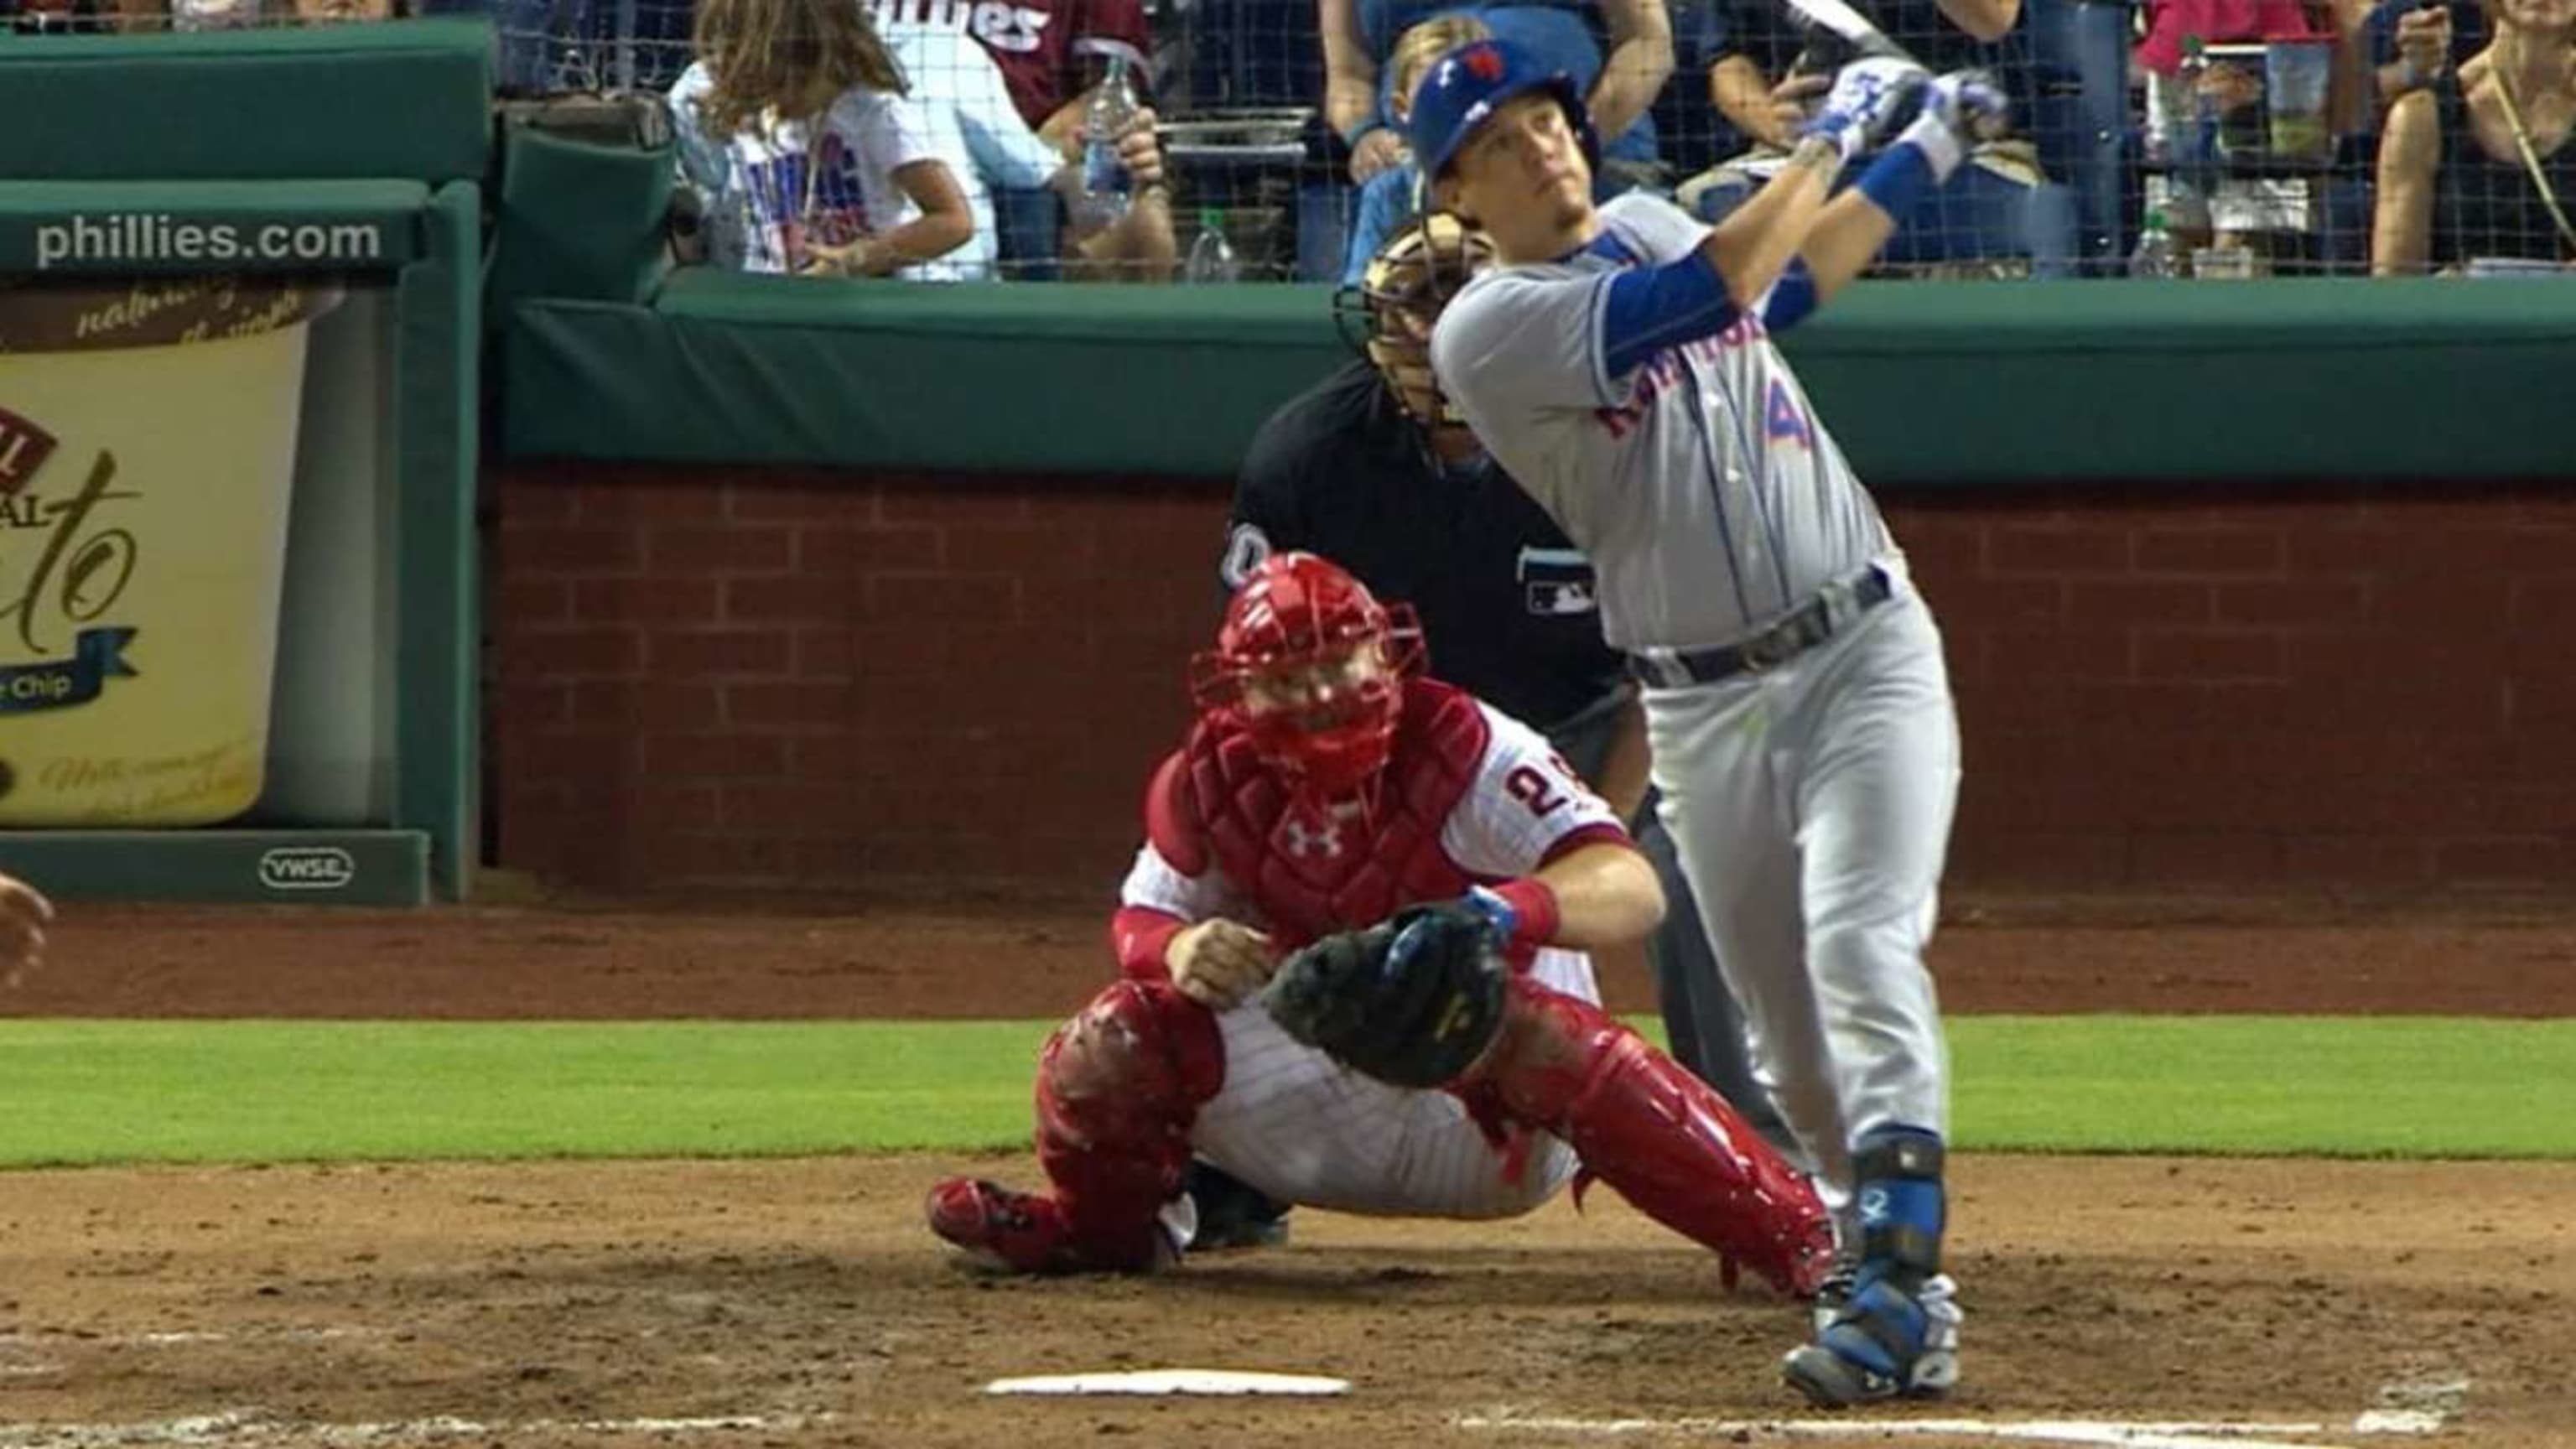 Phillies' first baseman tops Mets' Wright to win Home Run Derby